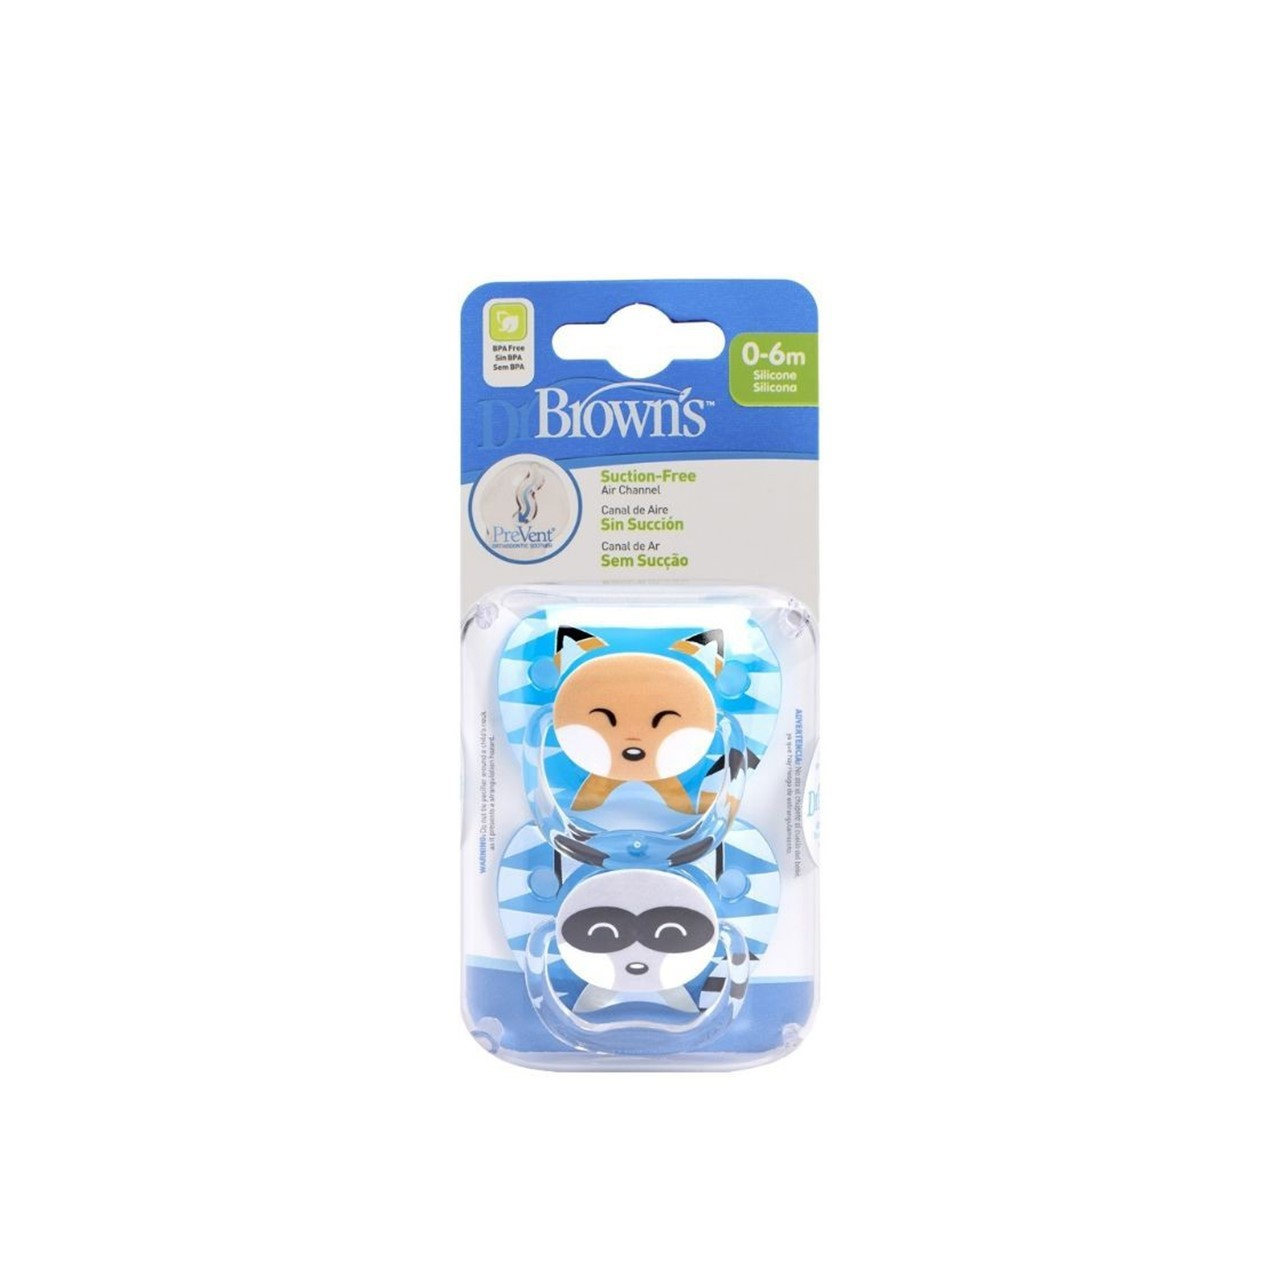 Dr Browns Chupetes Prevent Classic Animal Faces 6-18 M 2 Unidades